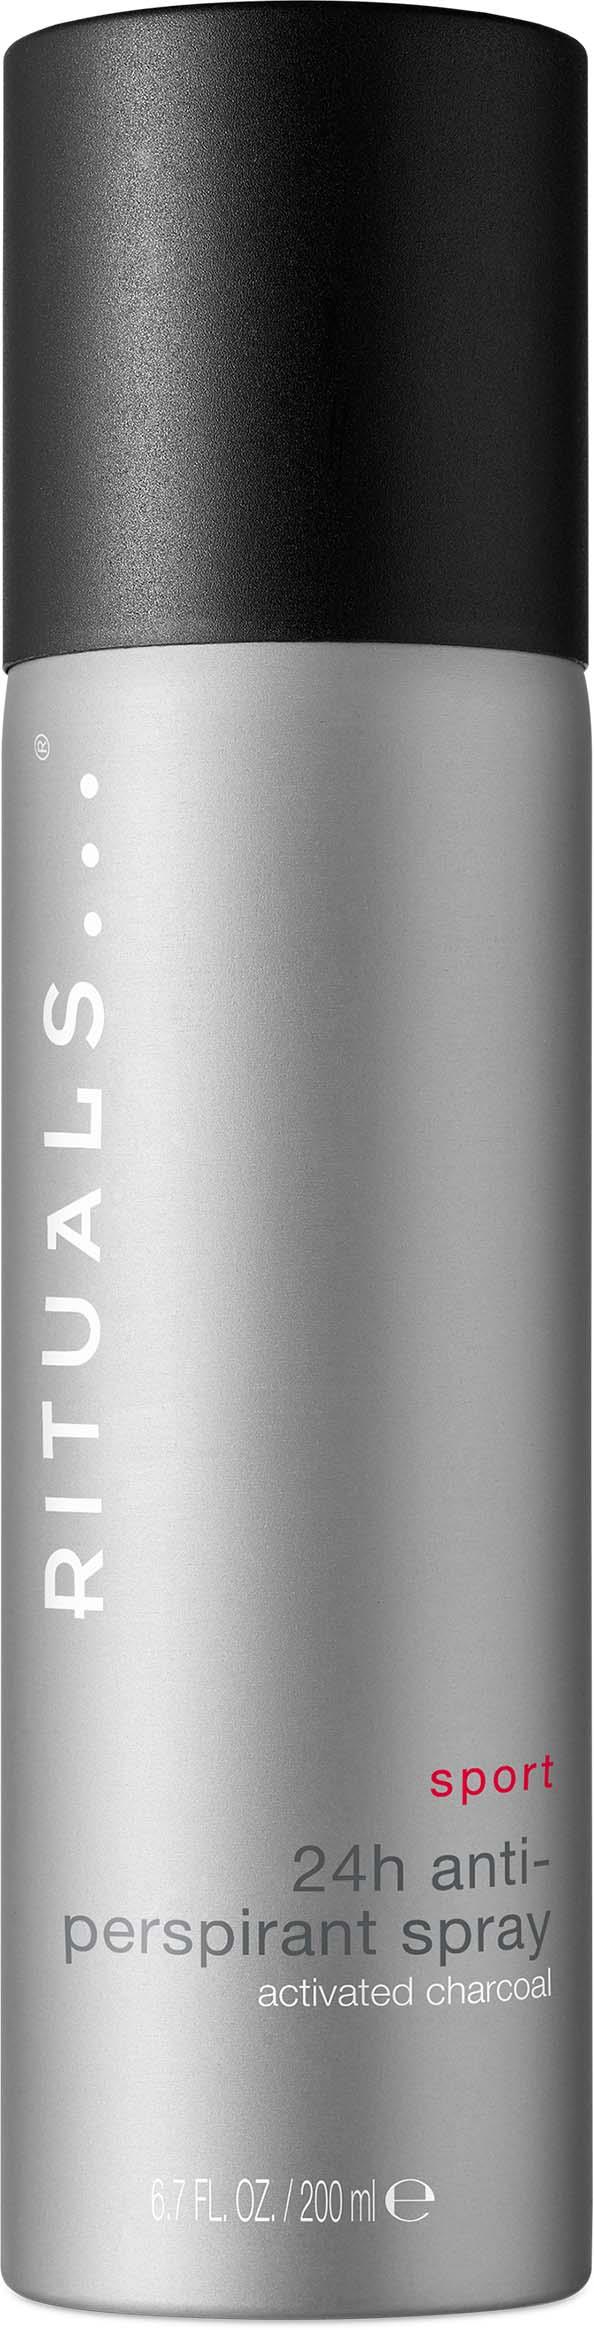 https://lyko.com/globalassets/product-images/rituals-rituals-sport-24h-anti-perspirant-spray-200ml-1808-830-0200_1.jpg?ref=75890077A2&w=594&h=2330&quality=75